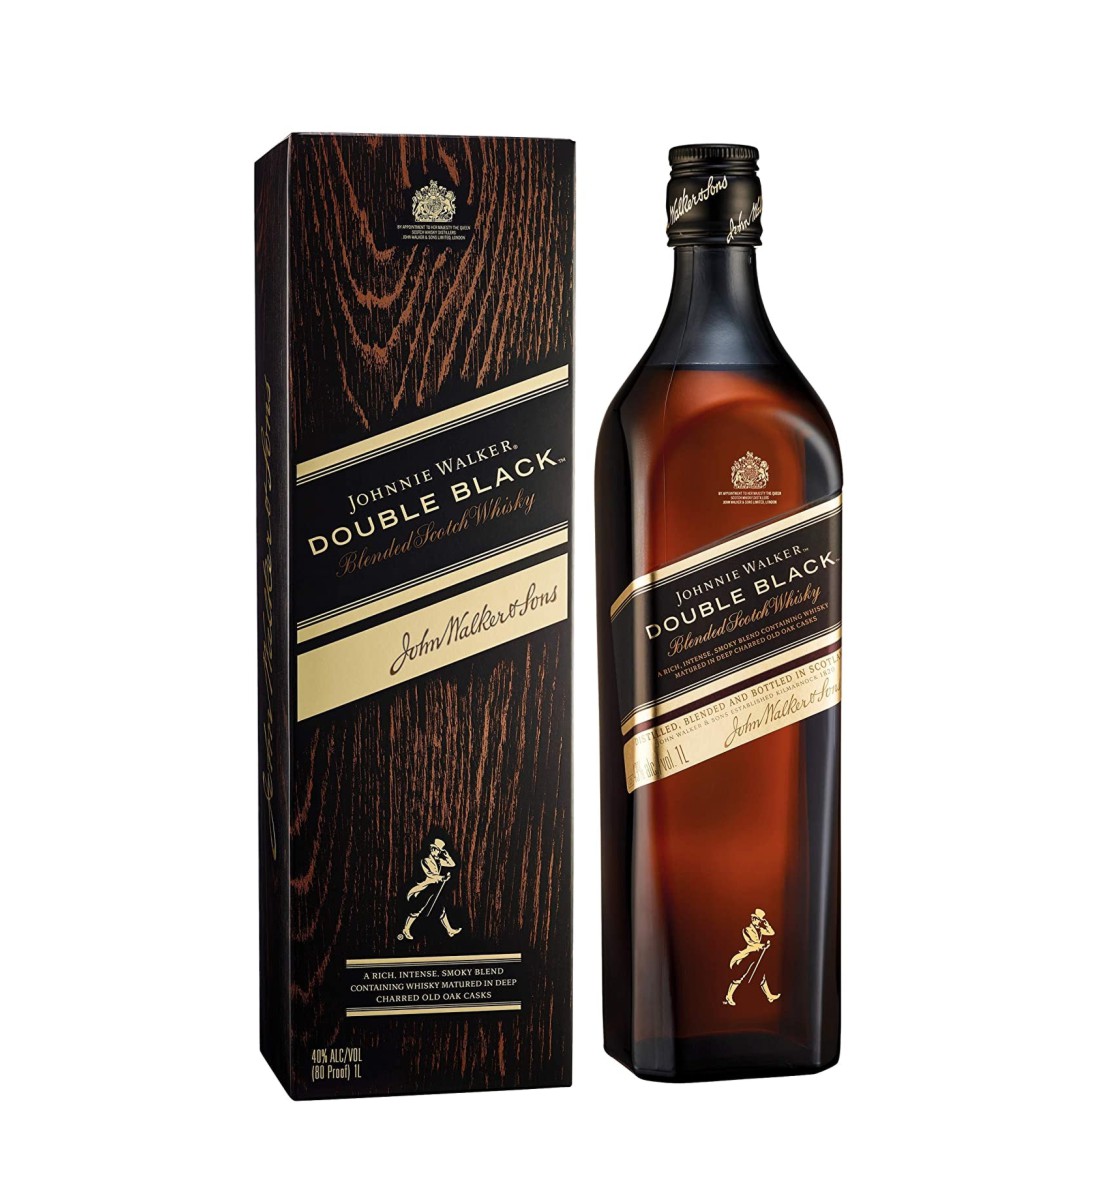 Johnnie Walker Double Black Label Whisky 1L bauturialcoolice.ro